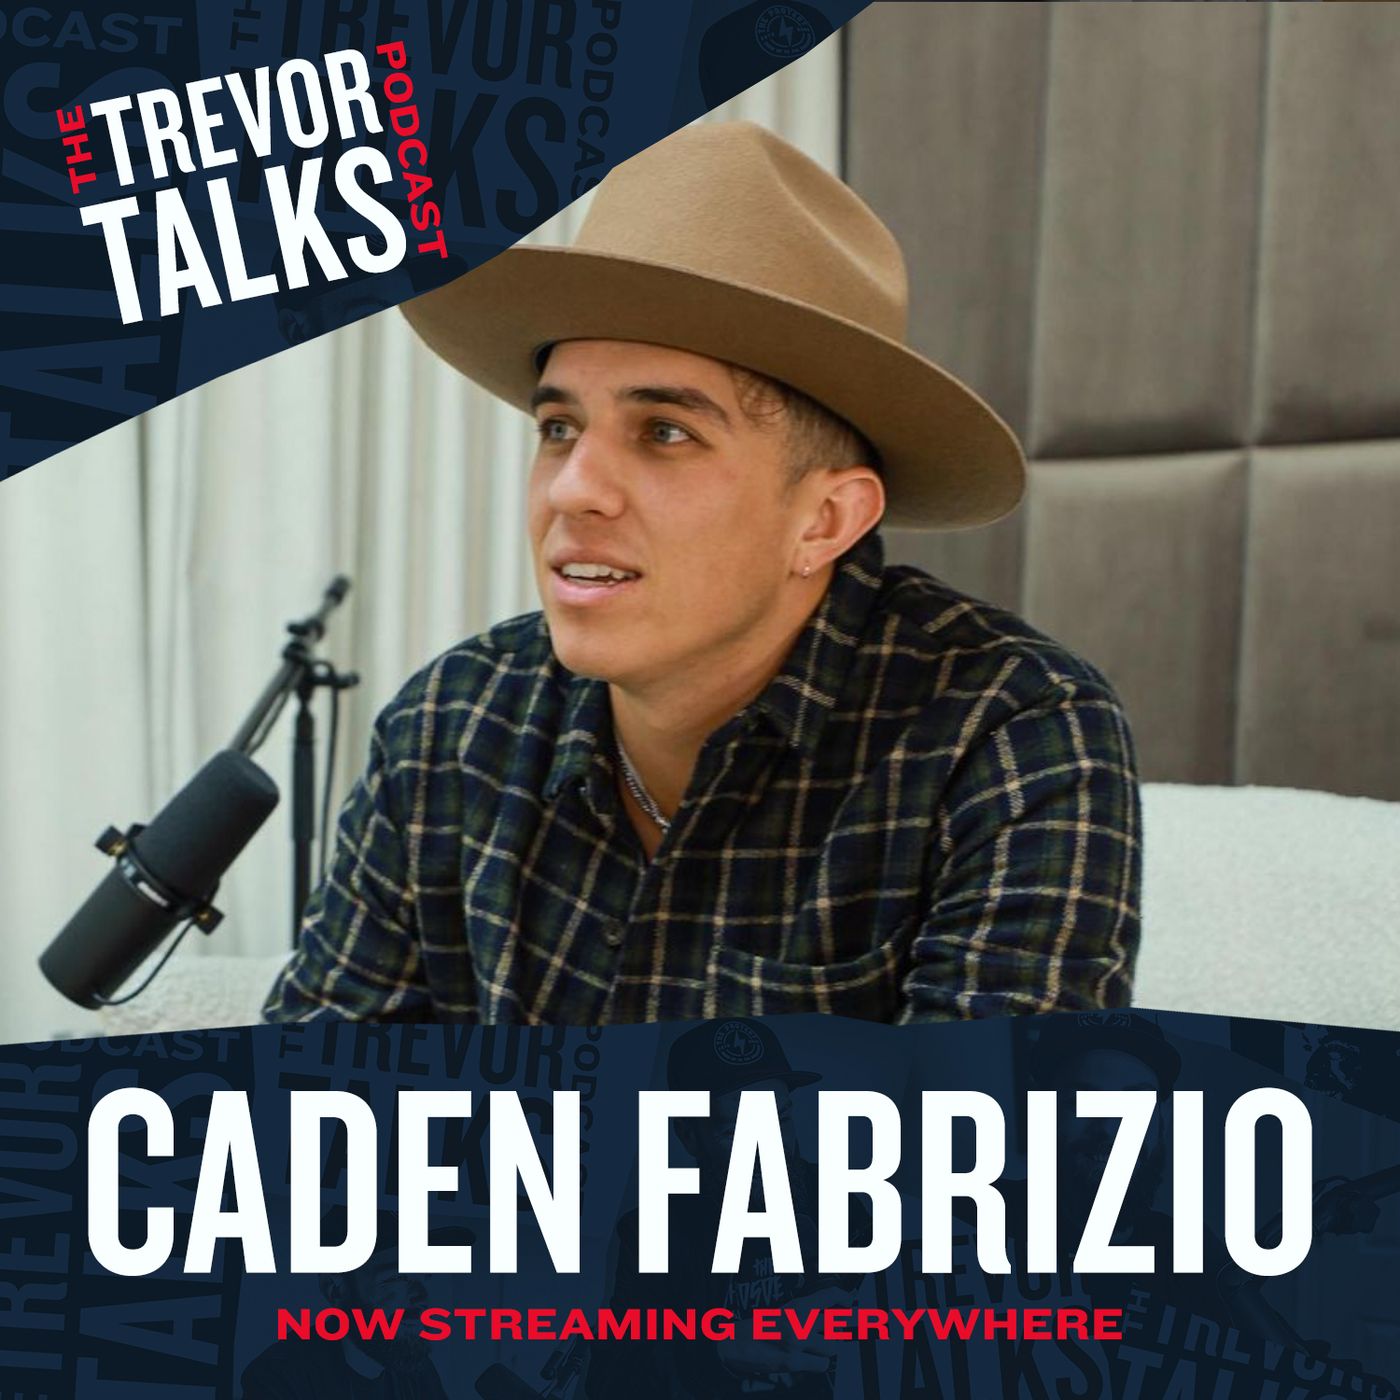 Yellowstone, Boy Bands & Escaping Performance Culture with Caden Fabrizio